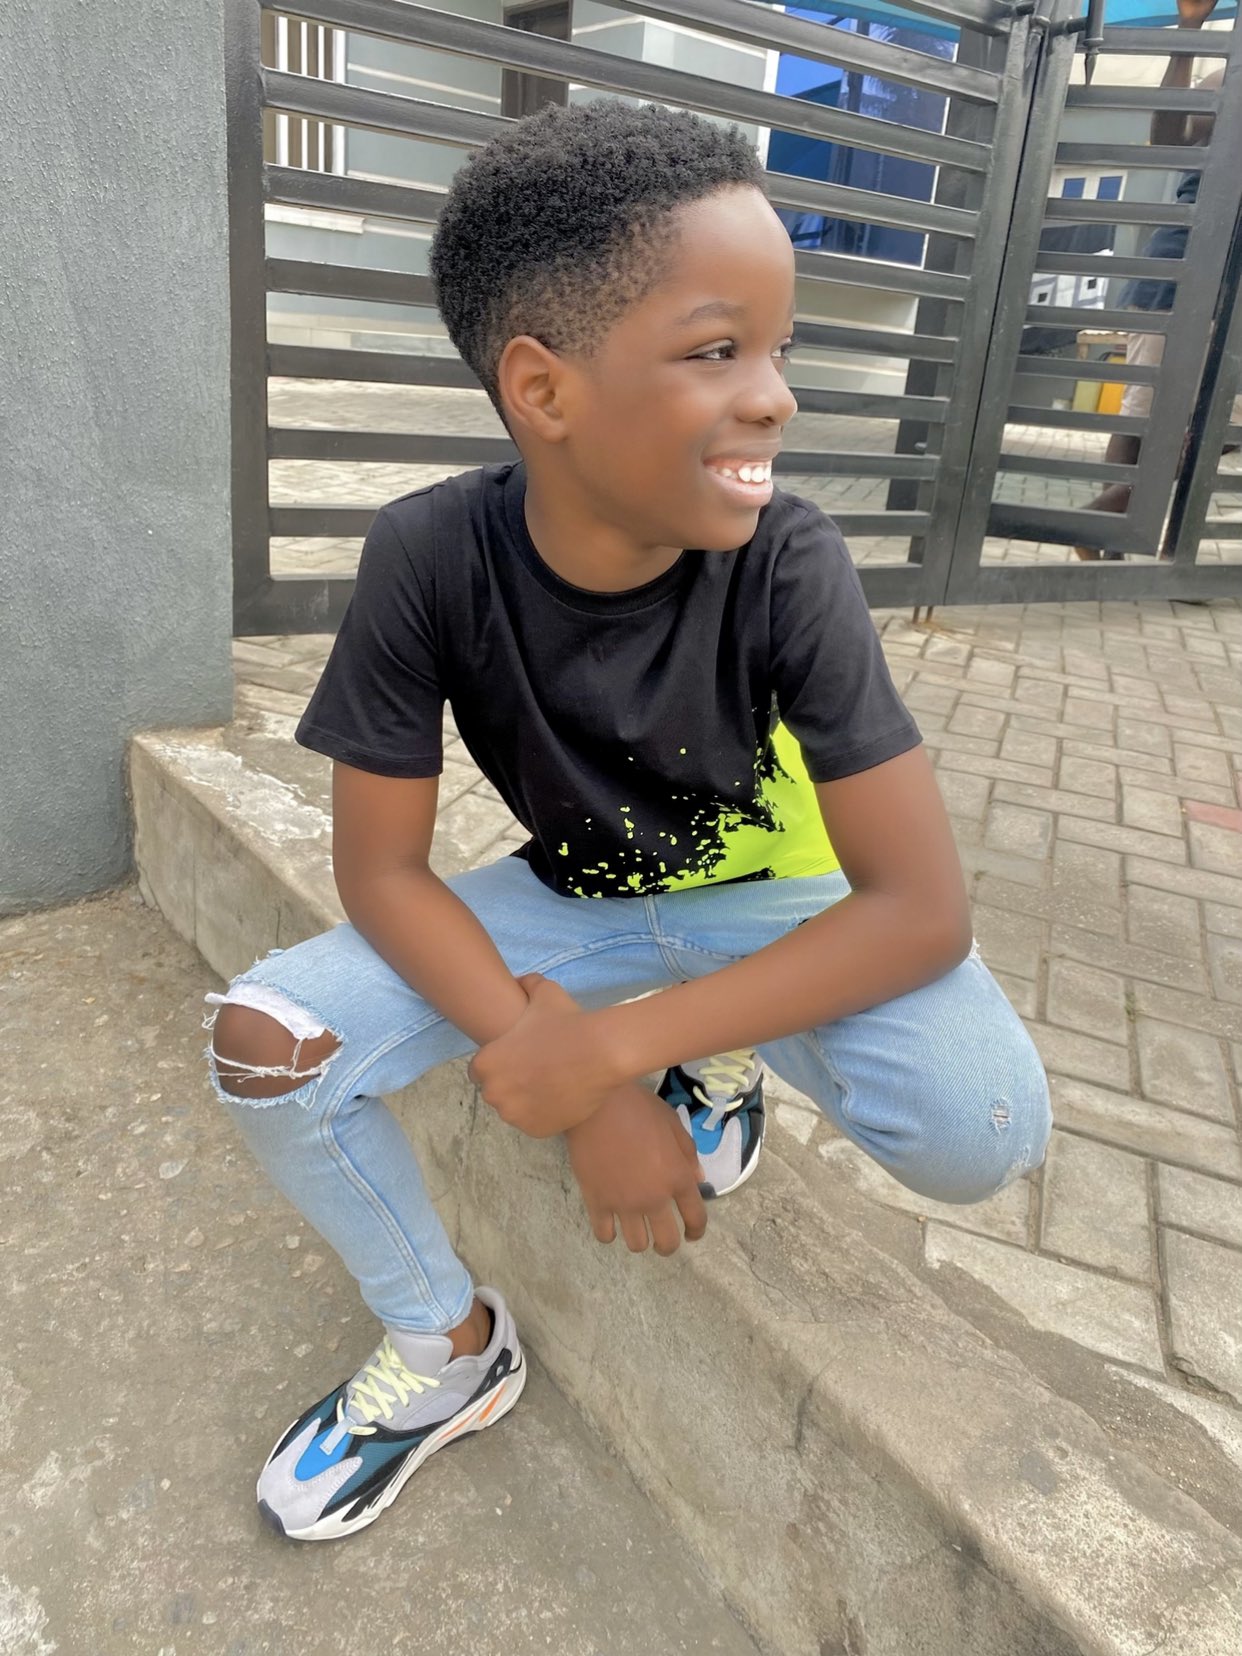 See the latest pictures of Wizkid's son Boluwatife 1